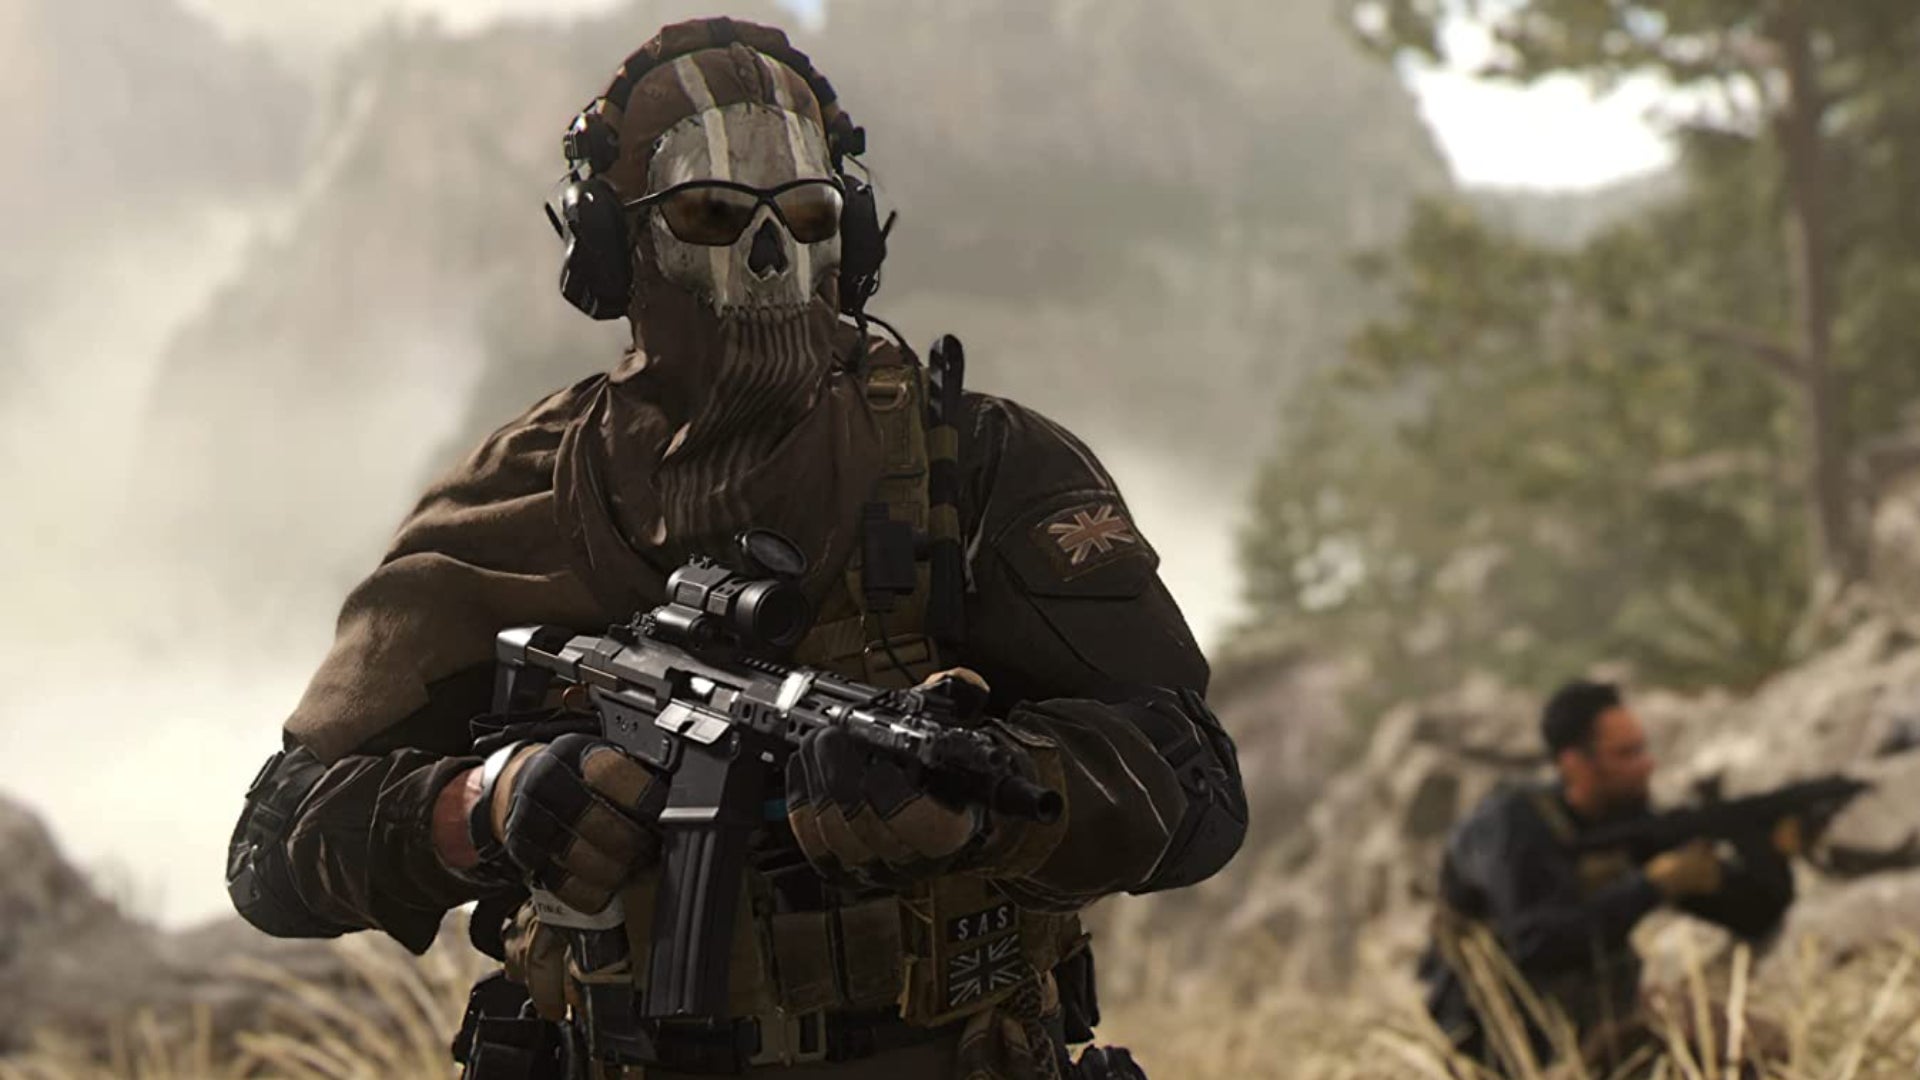 Image for Call of Duty will be on PlayStation for "several more years" beyond current deal, says Phil Spencer